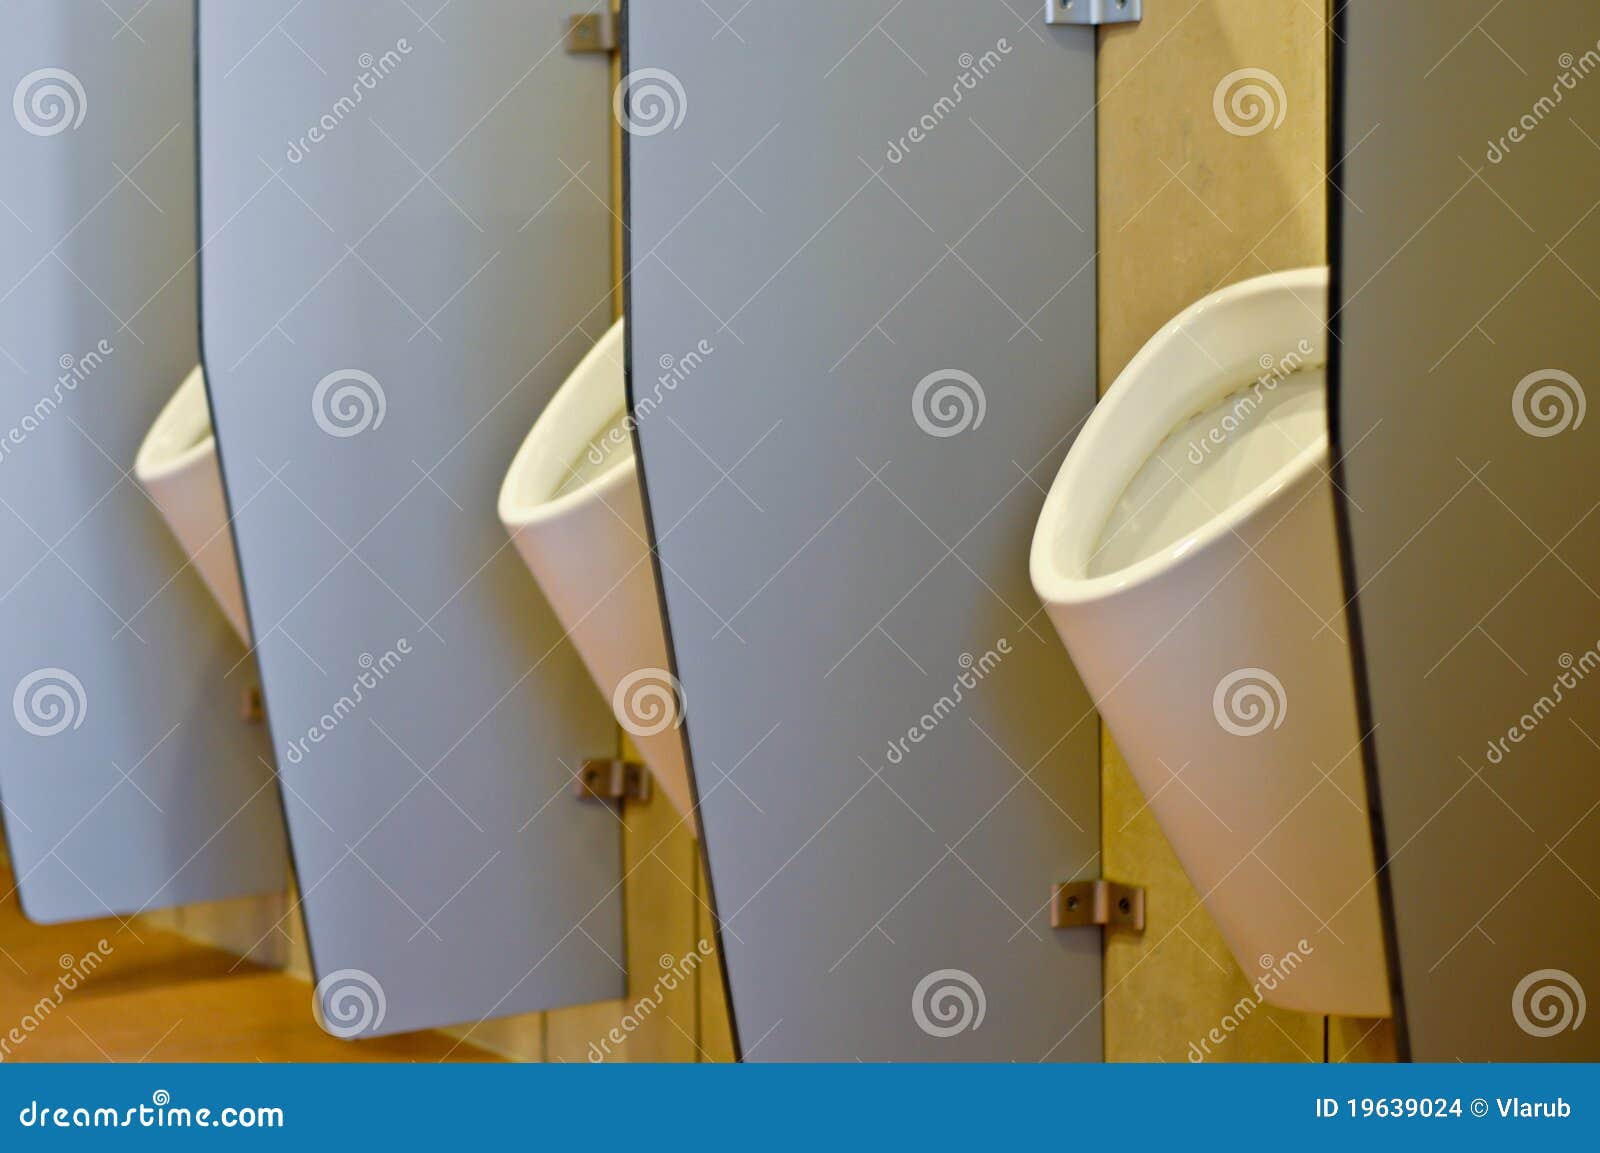 urinals behind partitions